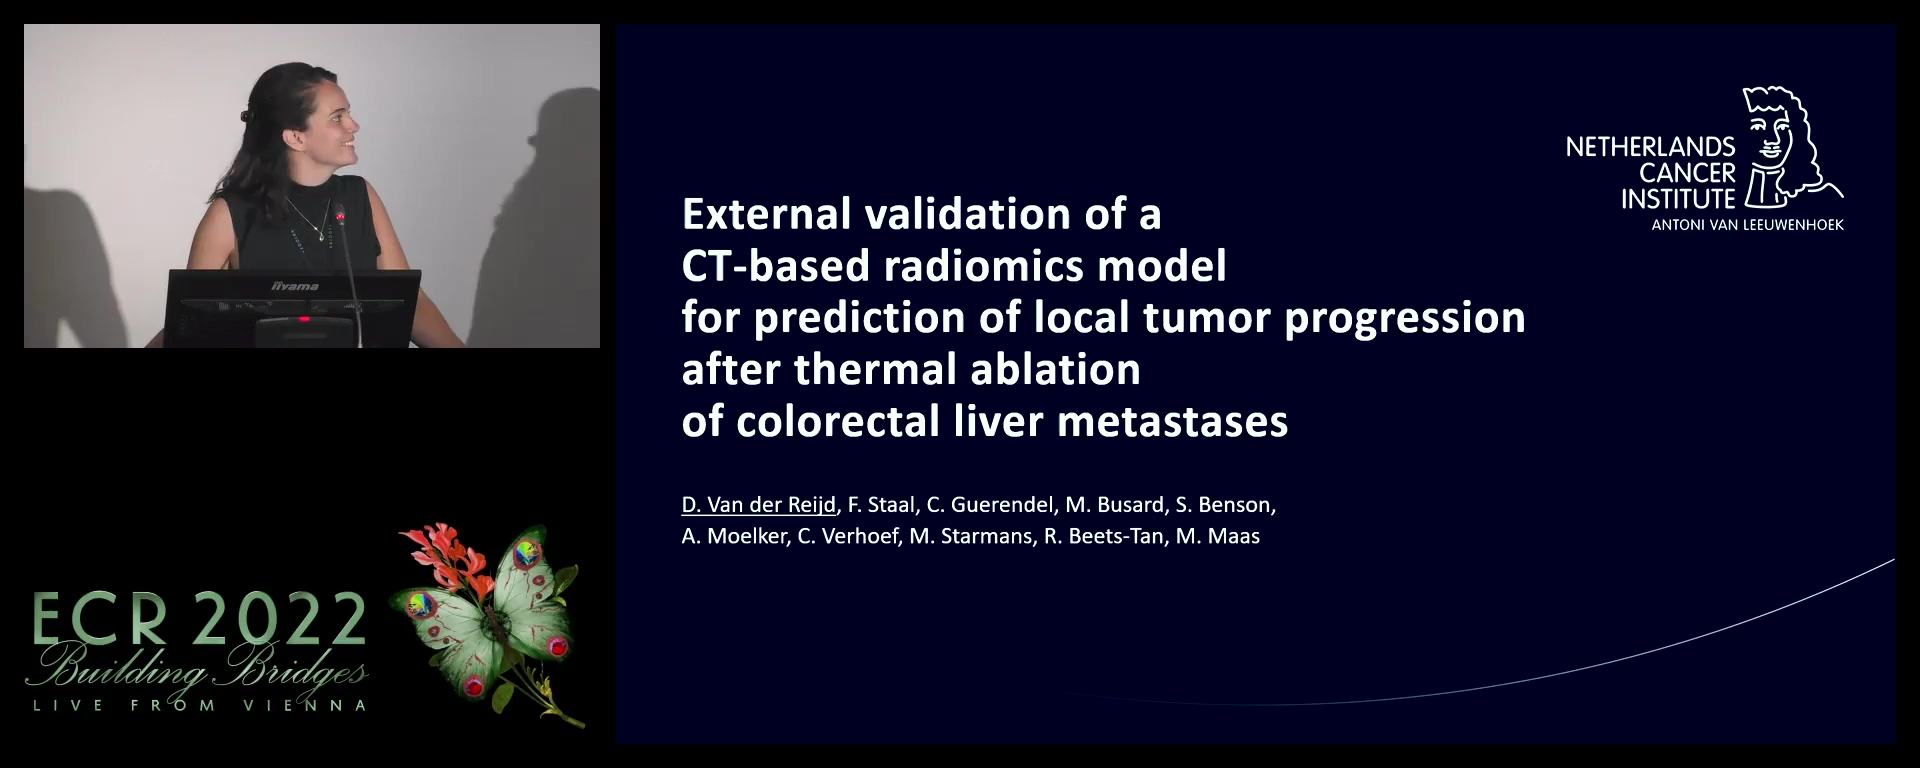 External validation of A CT-based radiomics model for prediction of local tumour progression after thermal ablation In colorectal liver metastases - Denise van der Reijd, Amsterdam / NL